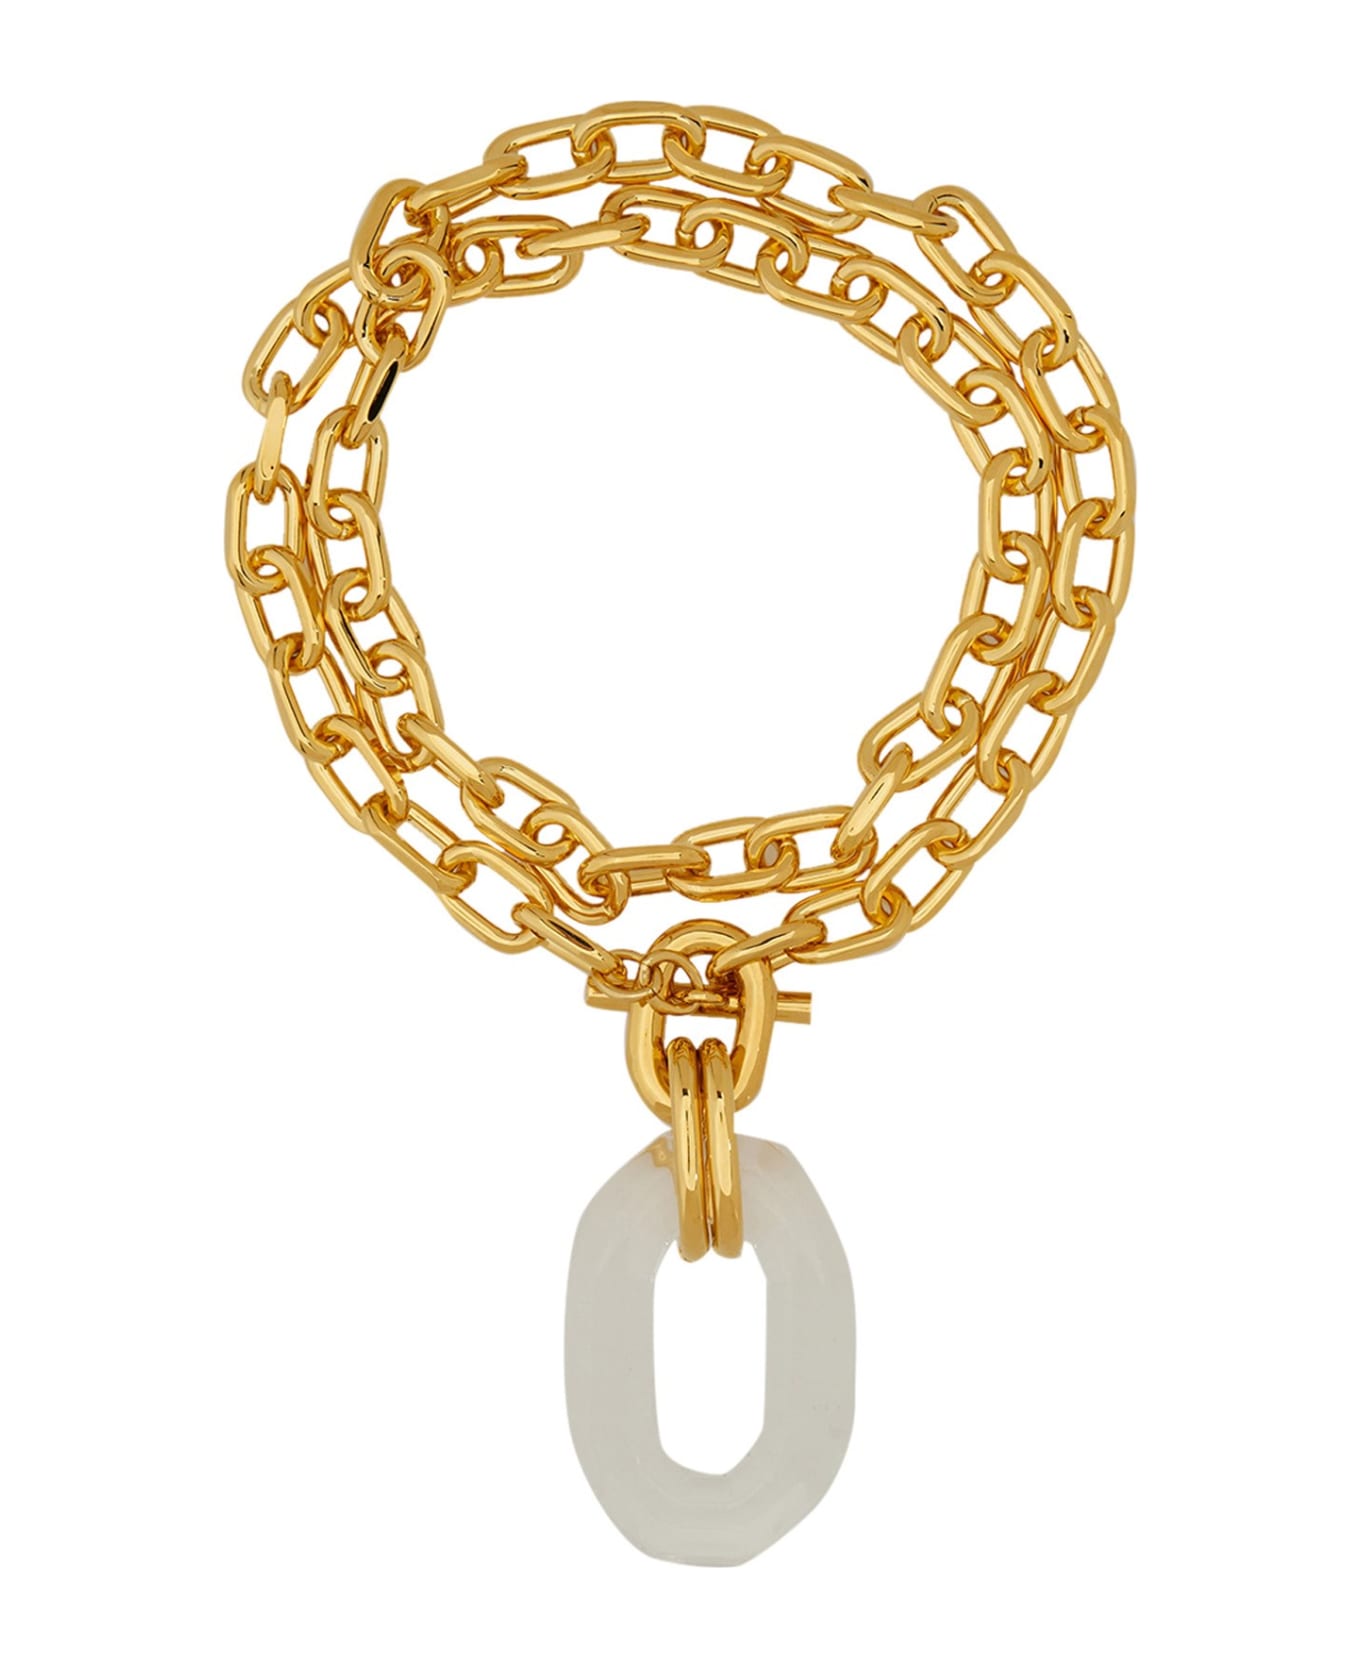 Paco Rabanne Necklace With Chain - Gold Transparent